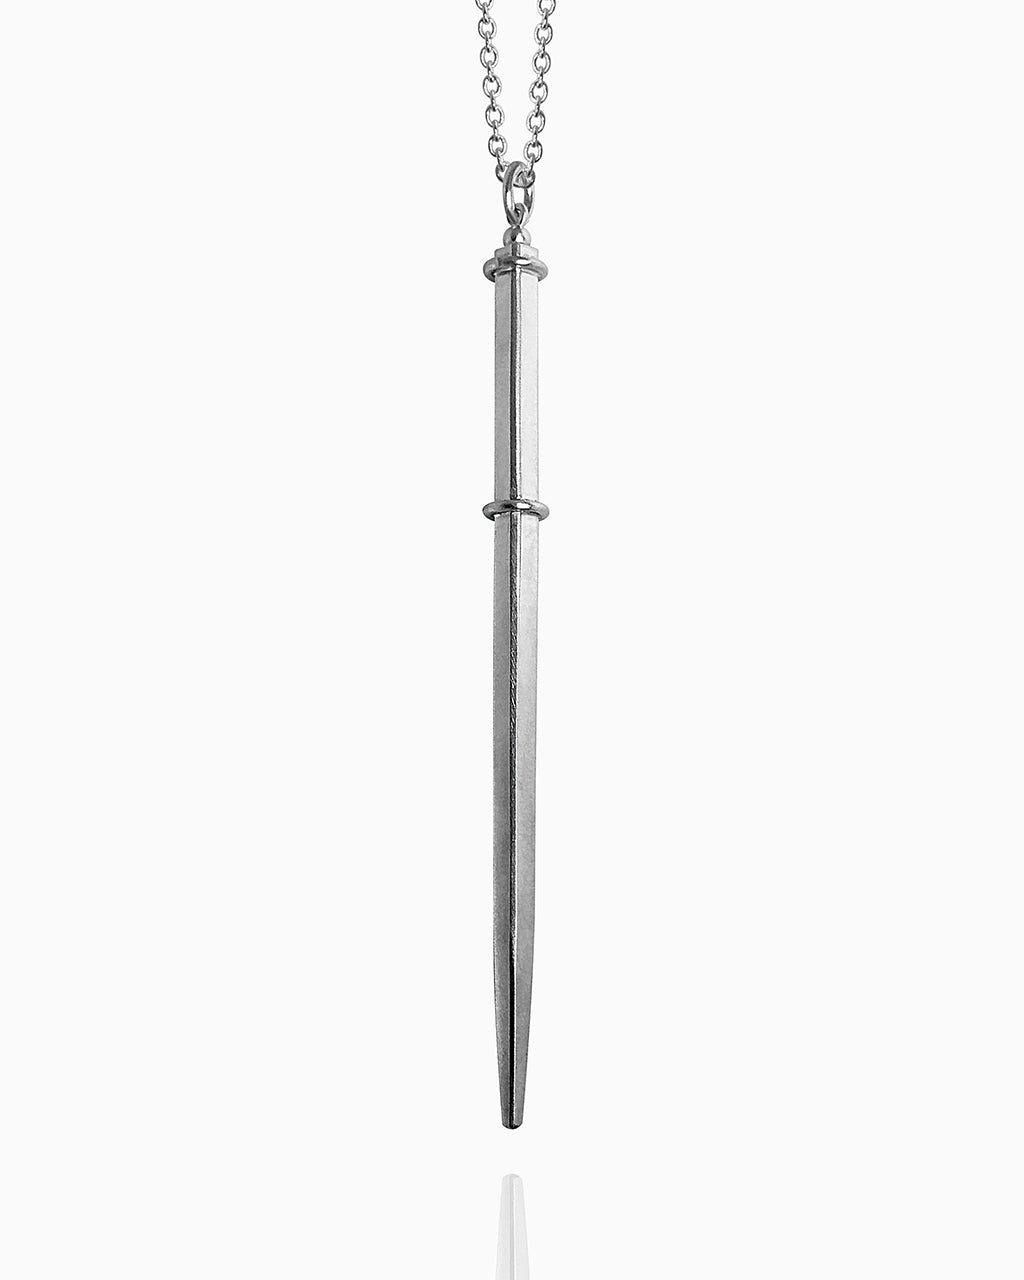 A square wand pendant made of sterling silver hanging from a chain against a white background. A silver ring around the top and another silver ring one-third of the way down the wand define the handle on this polished necklace.